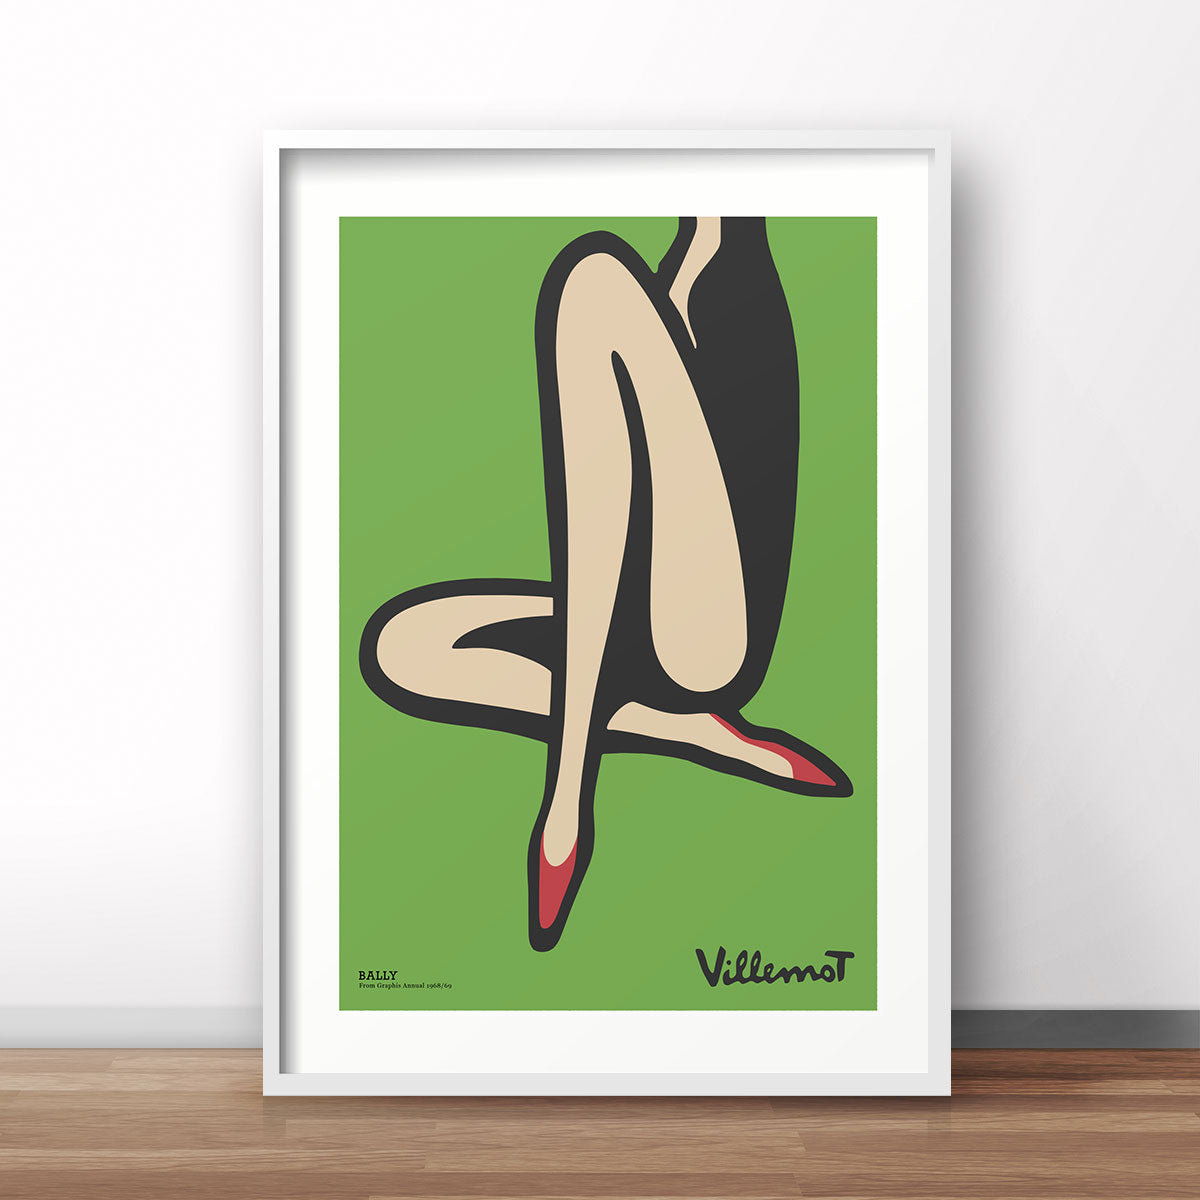 Villemot Bally retro vintage poster print in green from Places We Luv